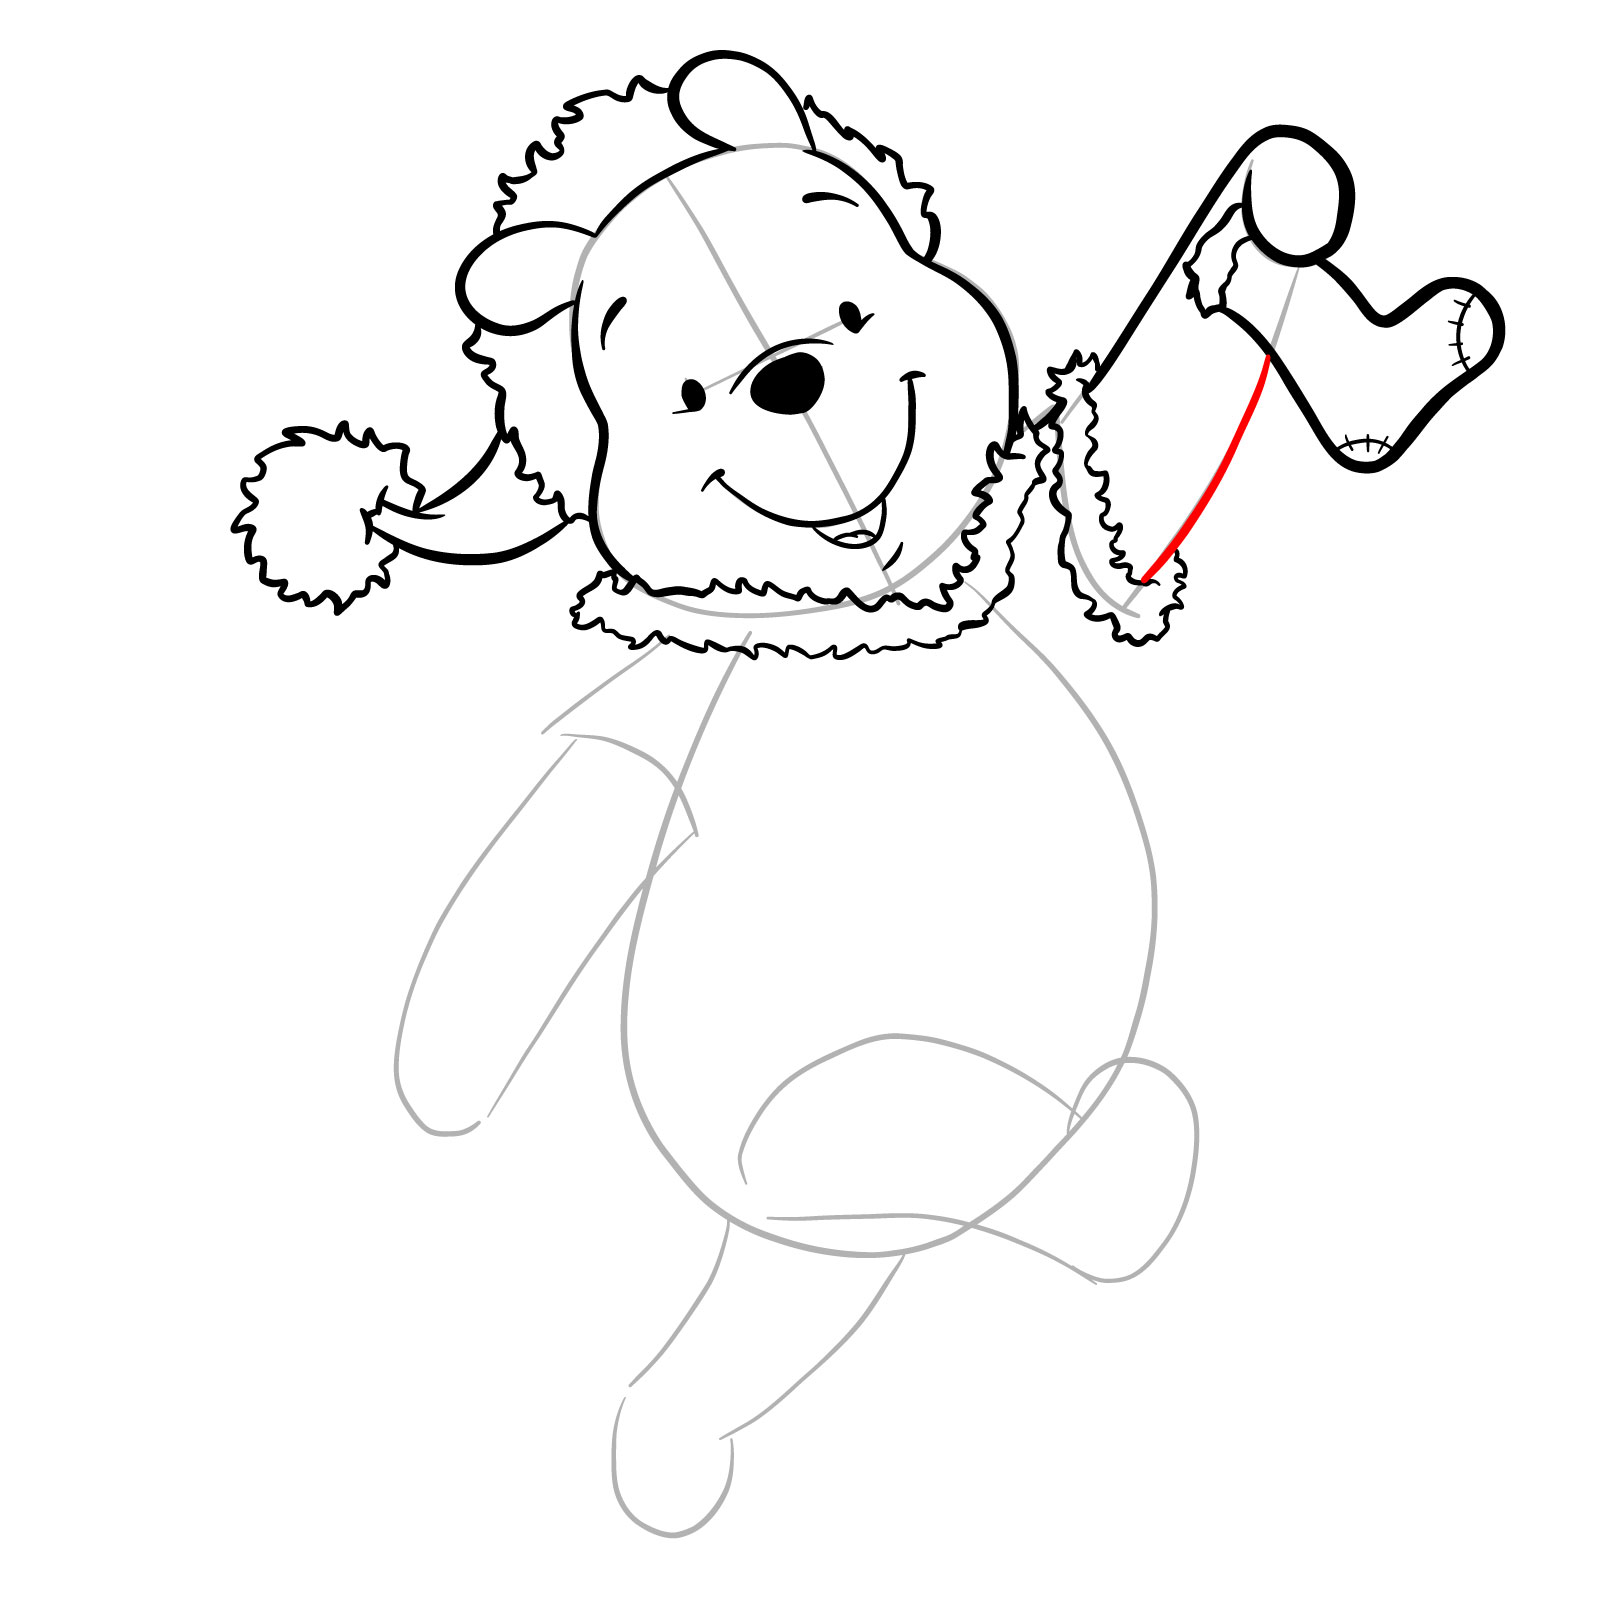 How to draw Winnie-the-Pooh Christmas style - step 19